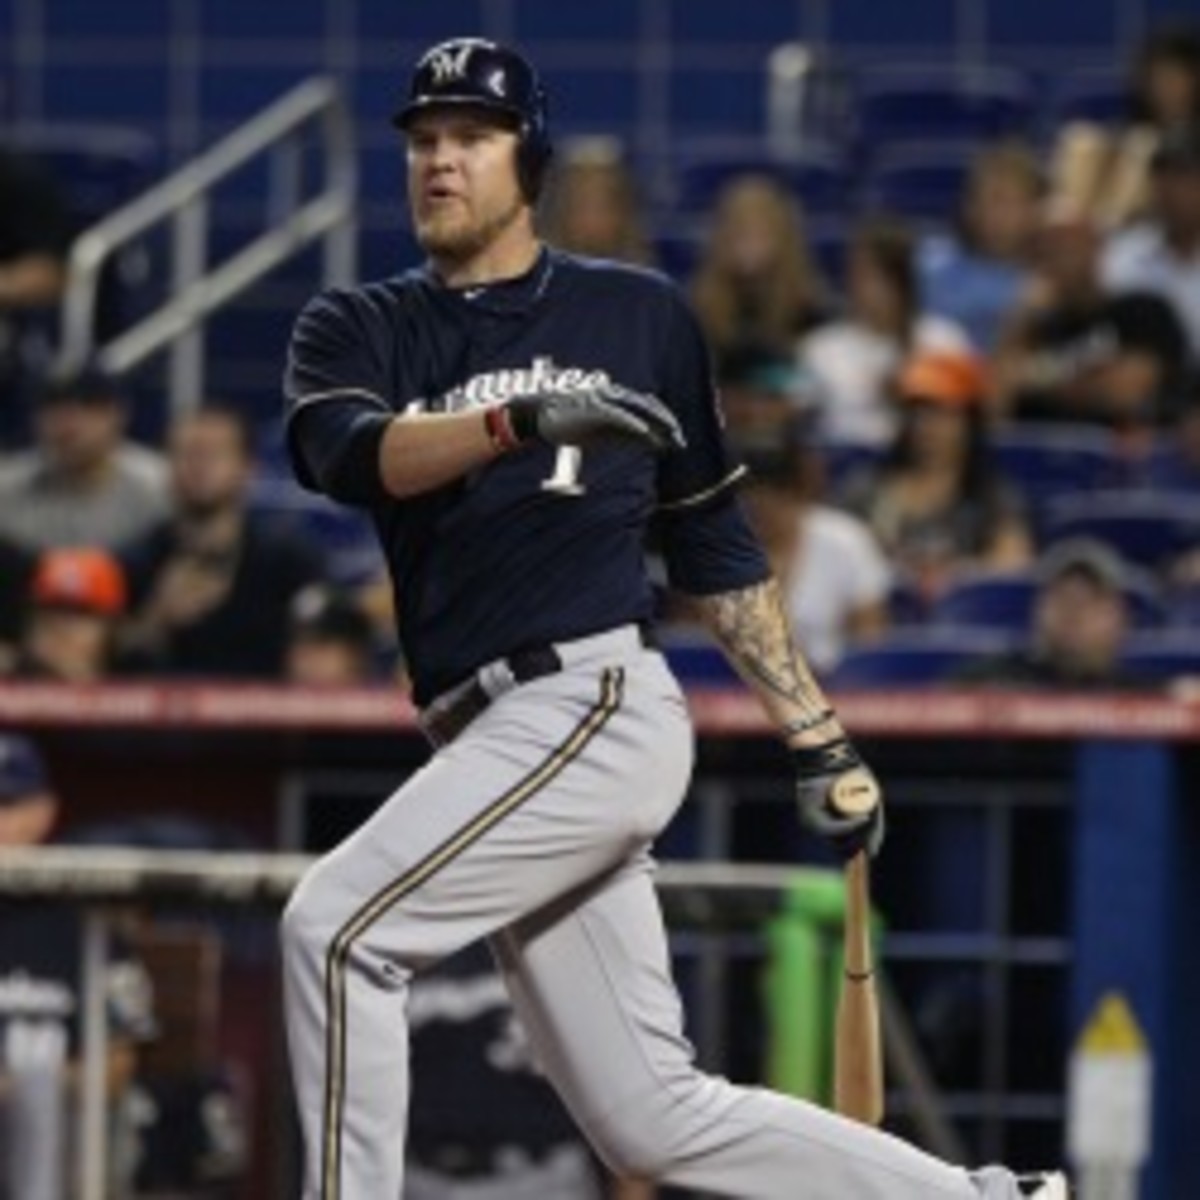 Brewers slugger Corey Hart will get a second opinion on his injured knee. (Marc Serota/Getty Images)